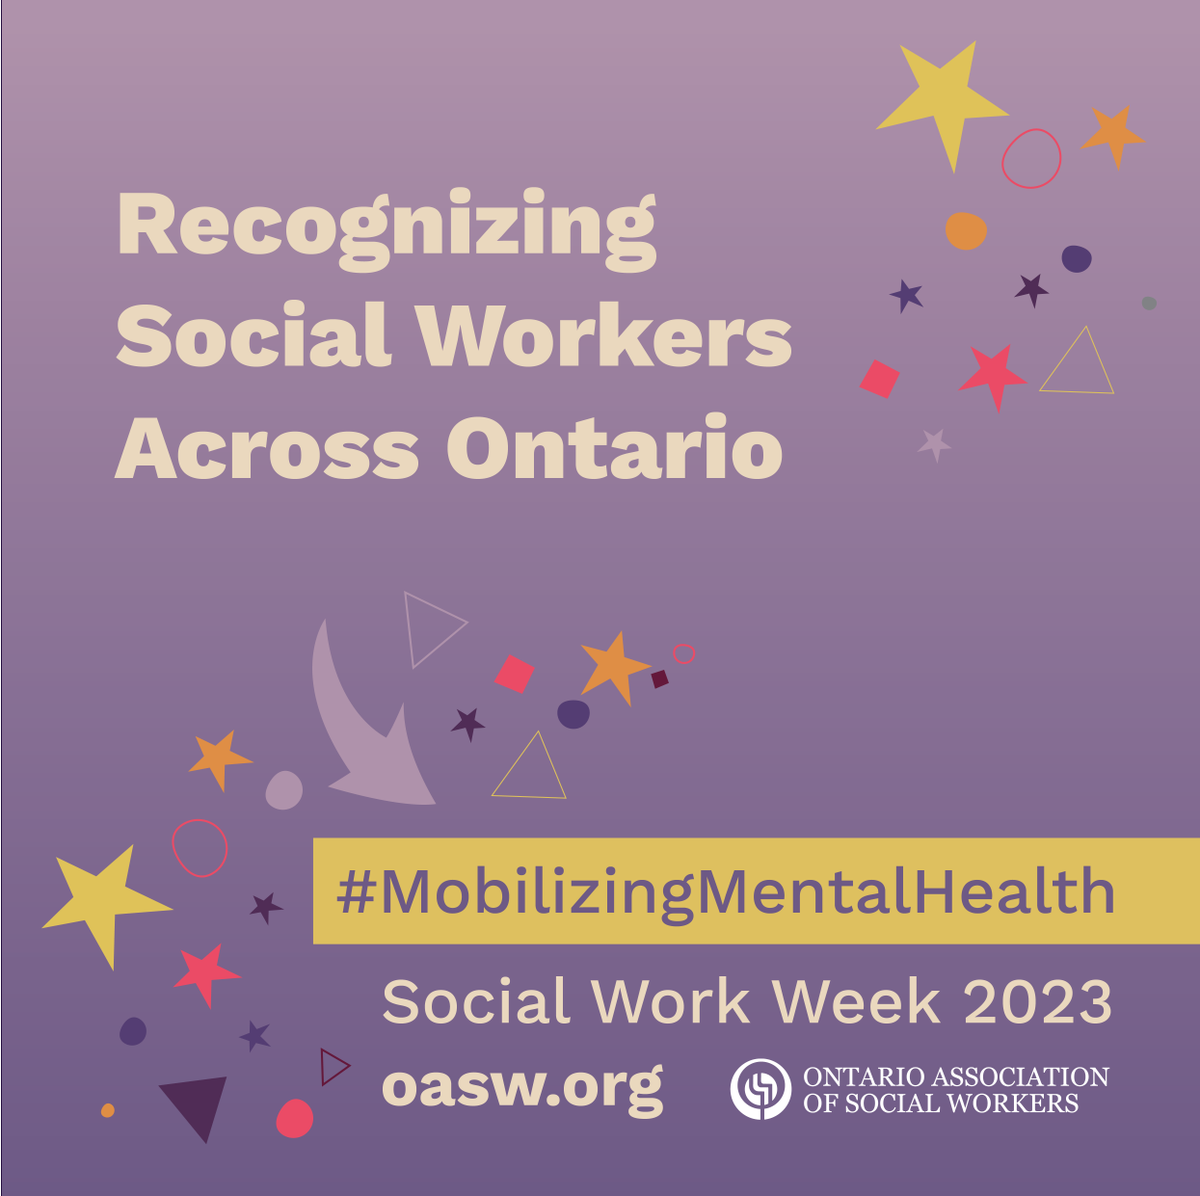 From March 6 -12, we celebrate #SocialWorkWeek, recognizing the essential contributions of social workers in our schools & communities. These individuals provide support and connection to essential services in a time of extraordinary challenges. #MobilizingMentalHealth